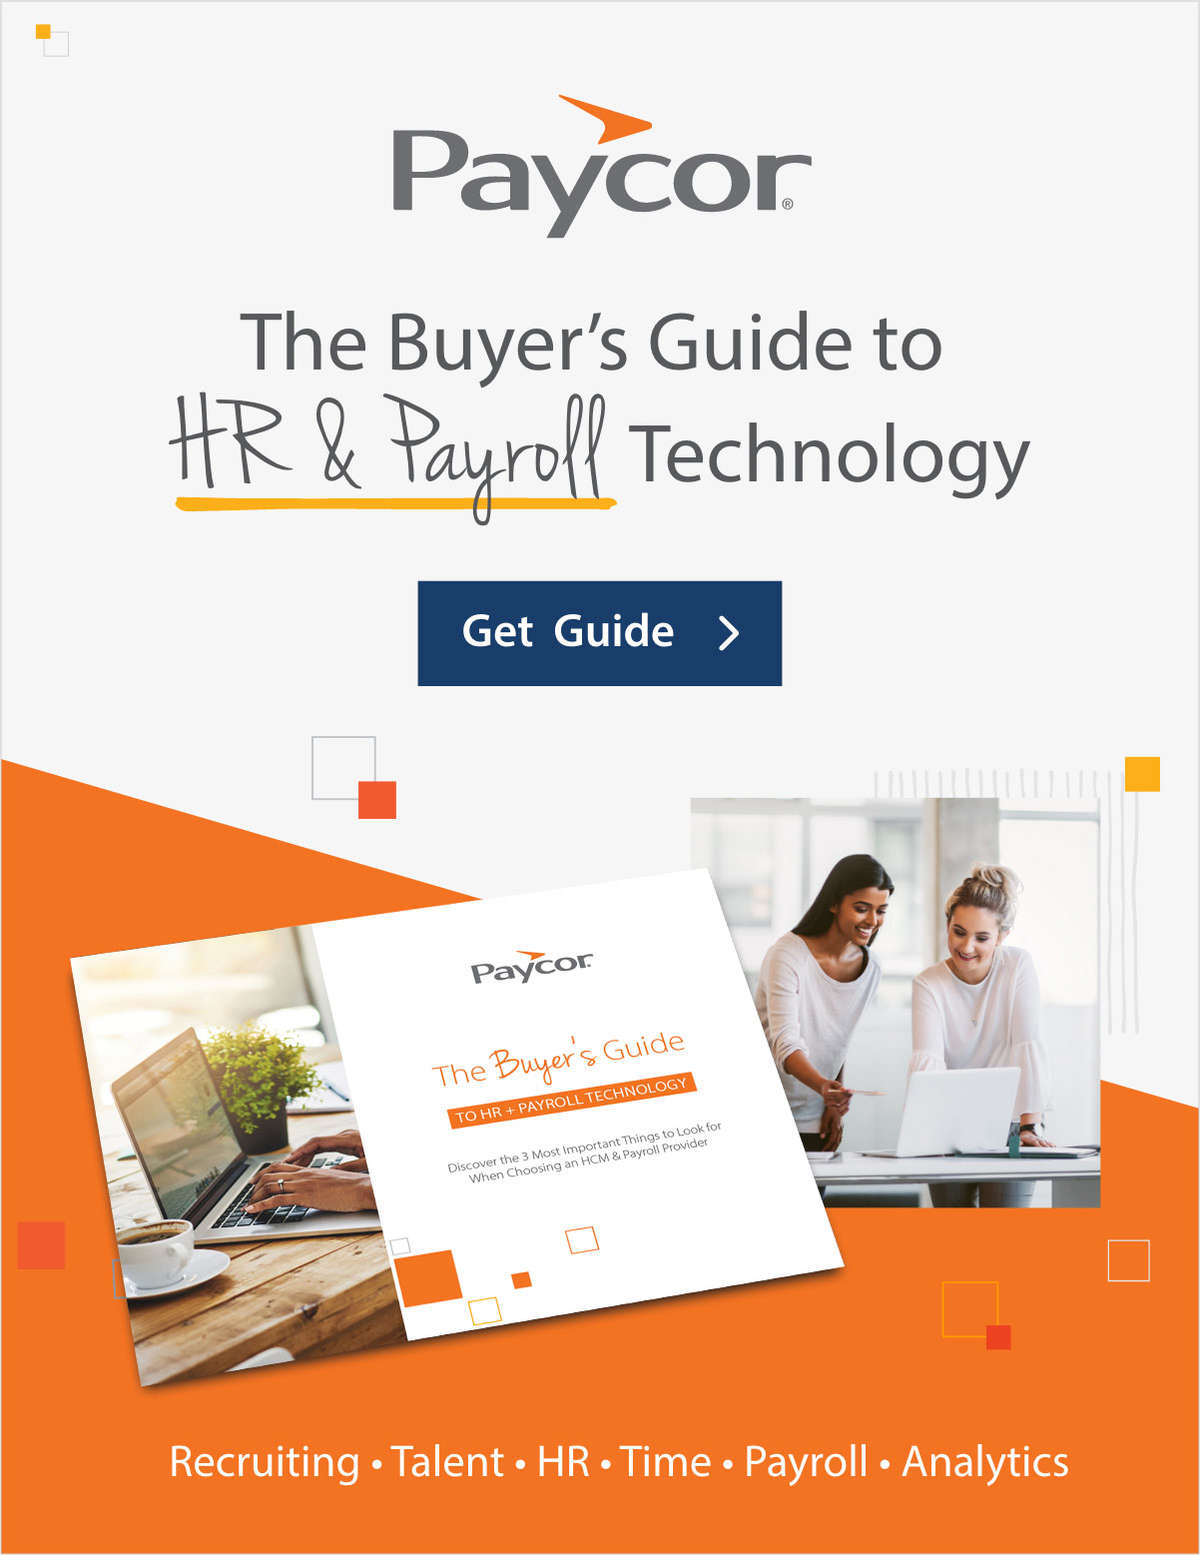 The Buyer's Guide to HR & Payroll Technology